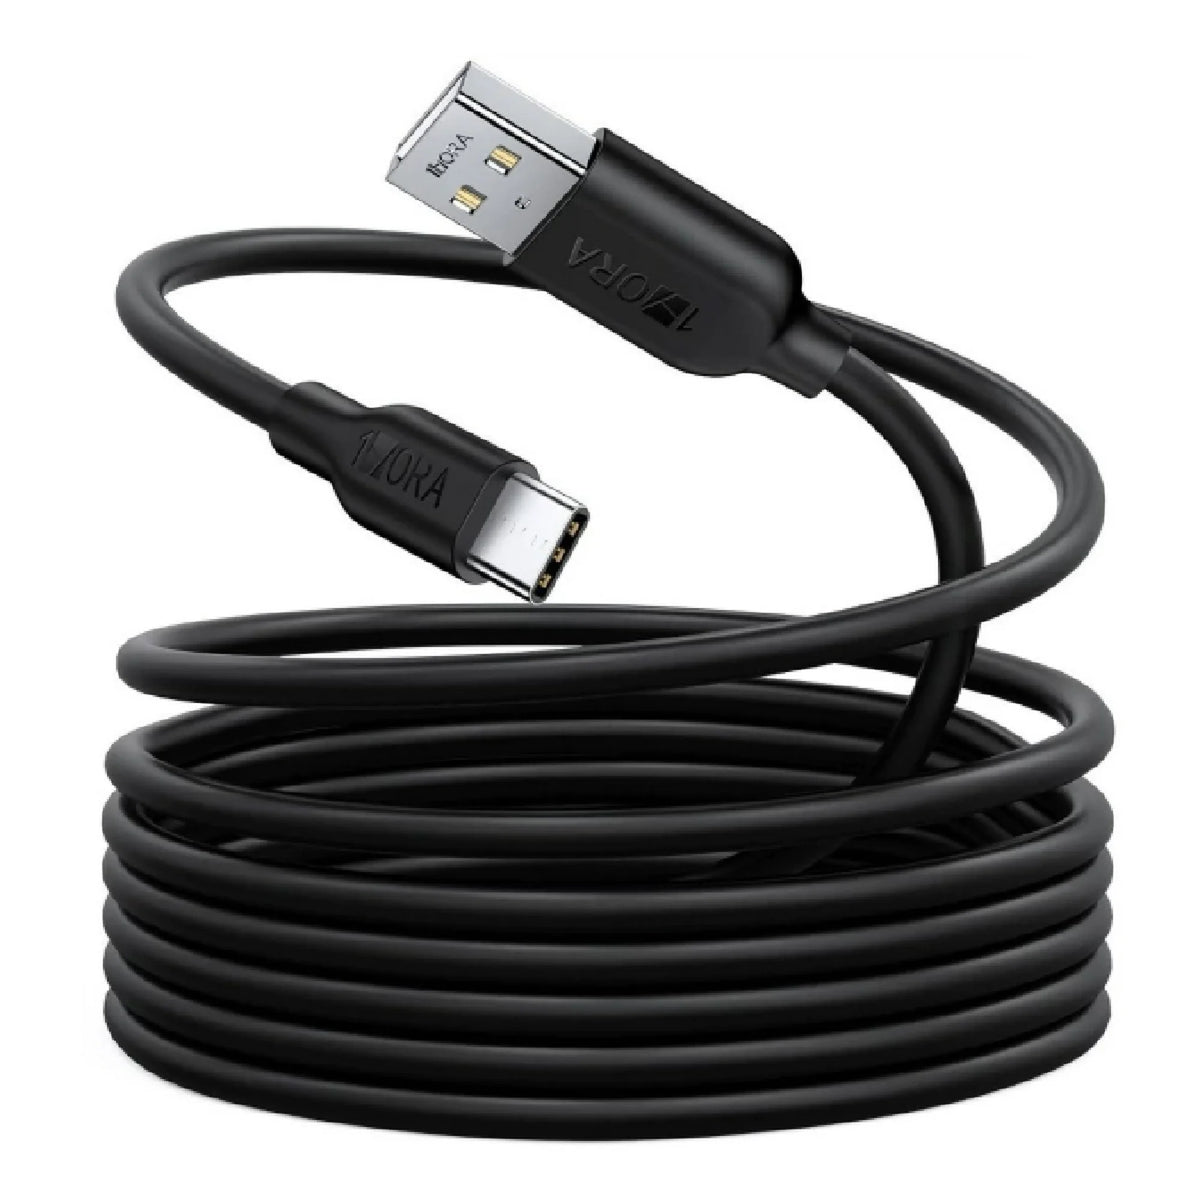 1Hora CAB246 V8 Series Type C USB 2.1A Cable 2M